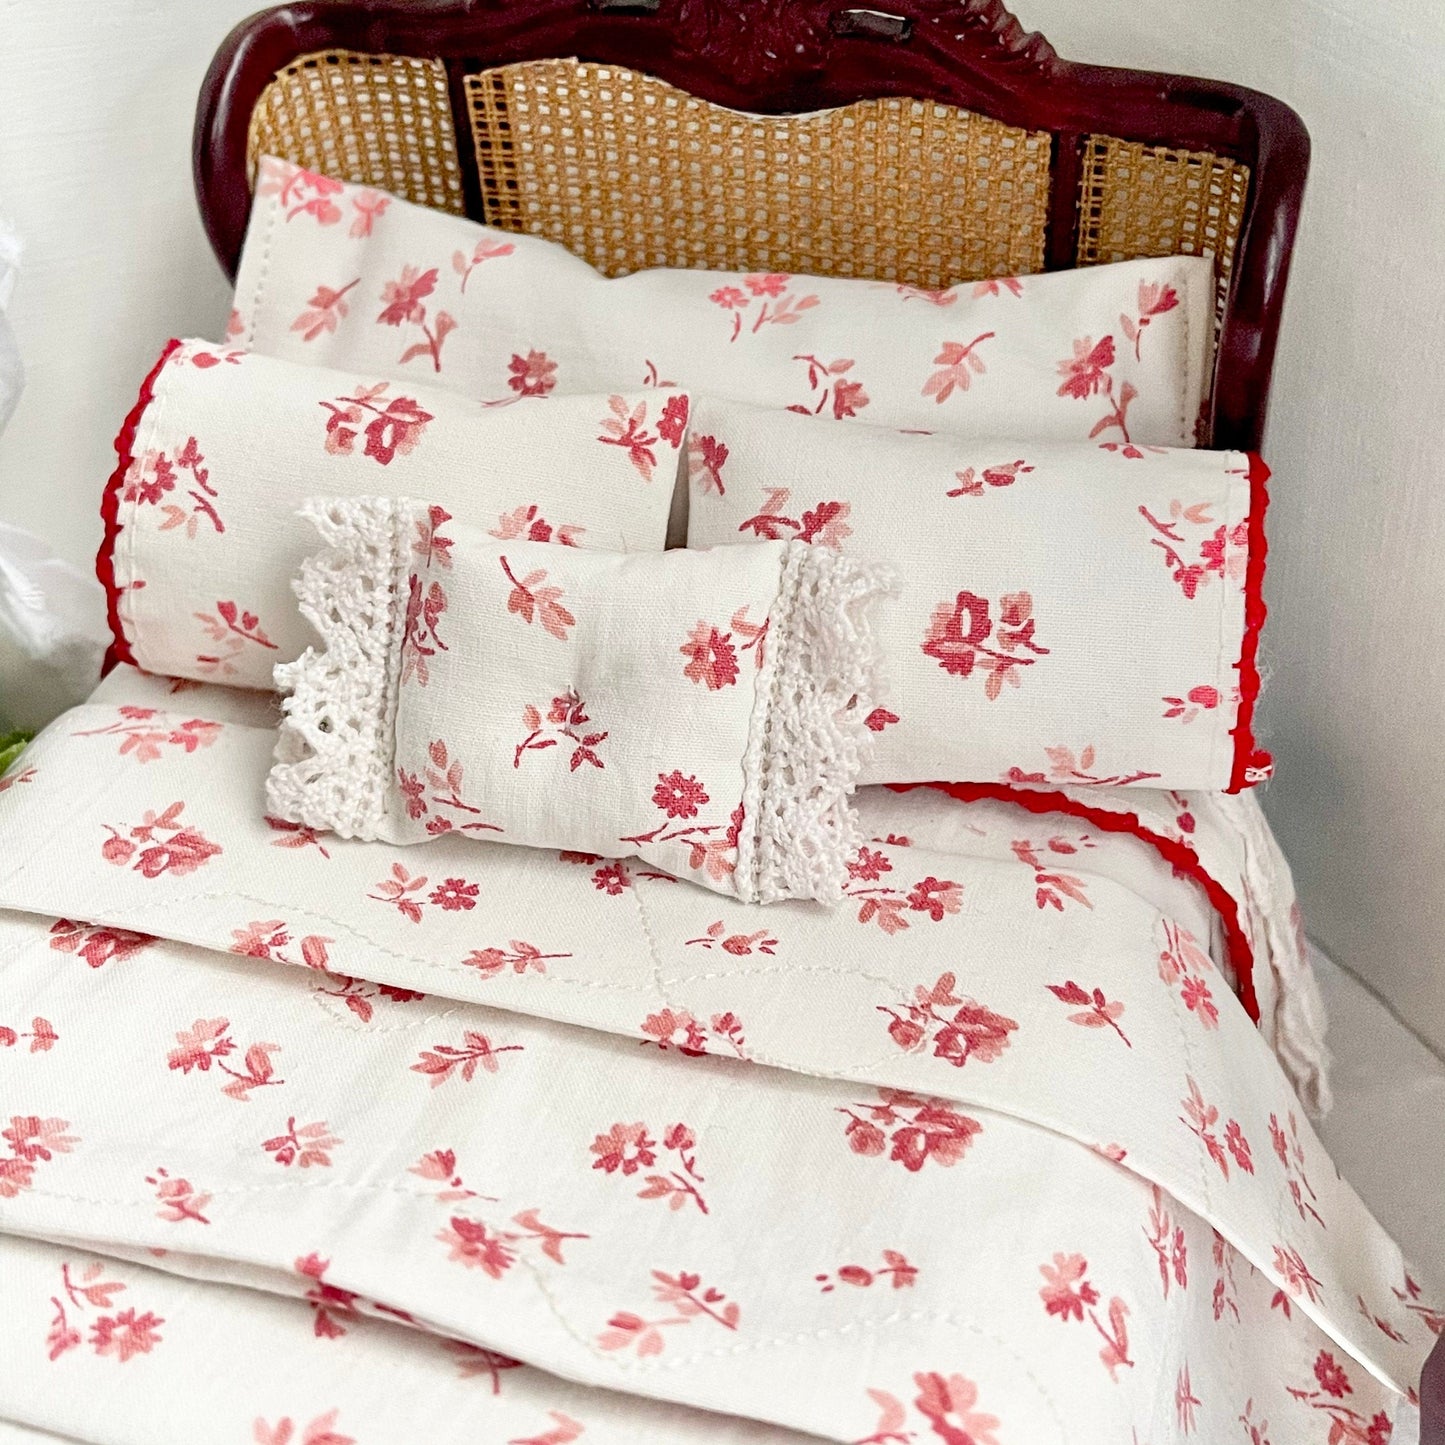 Chantallena Doll House Rustic Dollhouse Bedding, Petite Red Floral Cotton Bedding Set with Lace Trim, 1:12 Scale, Decor, Miniatures, Farmhouse Country, Chantallena